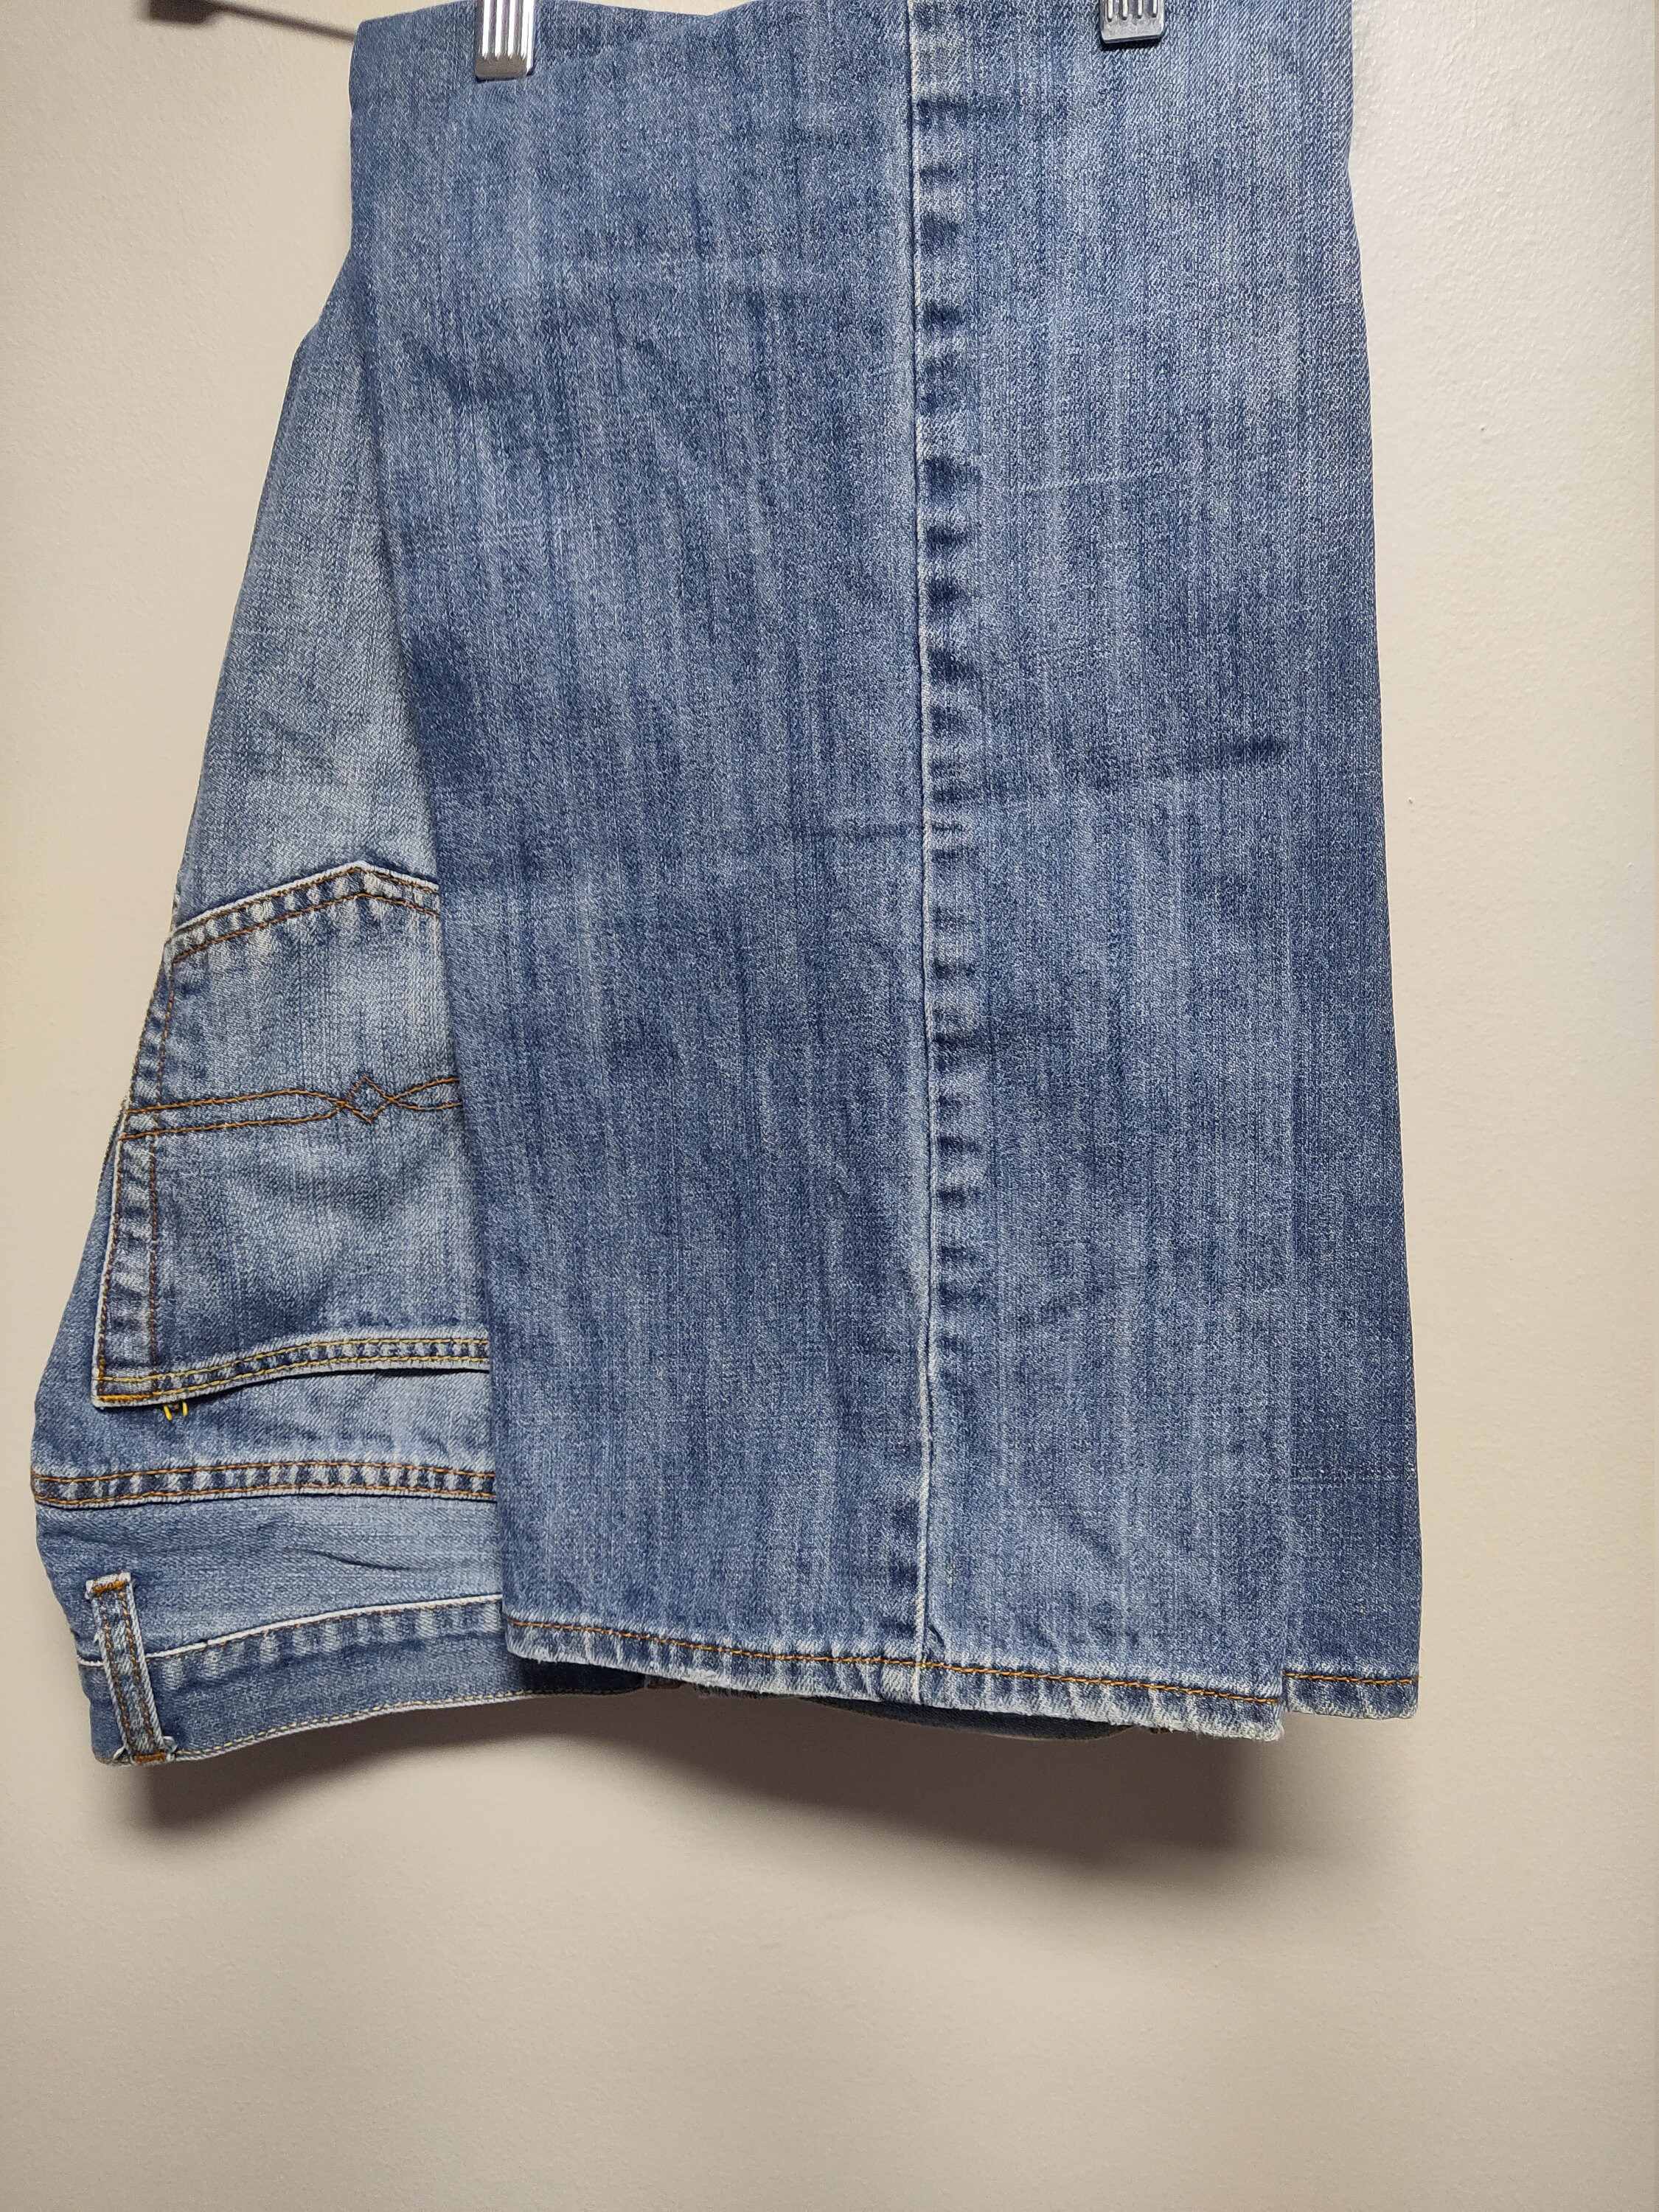 Vintage Jeans by LUCKY BRAND 100% Cotton 